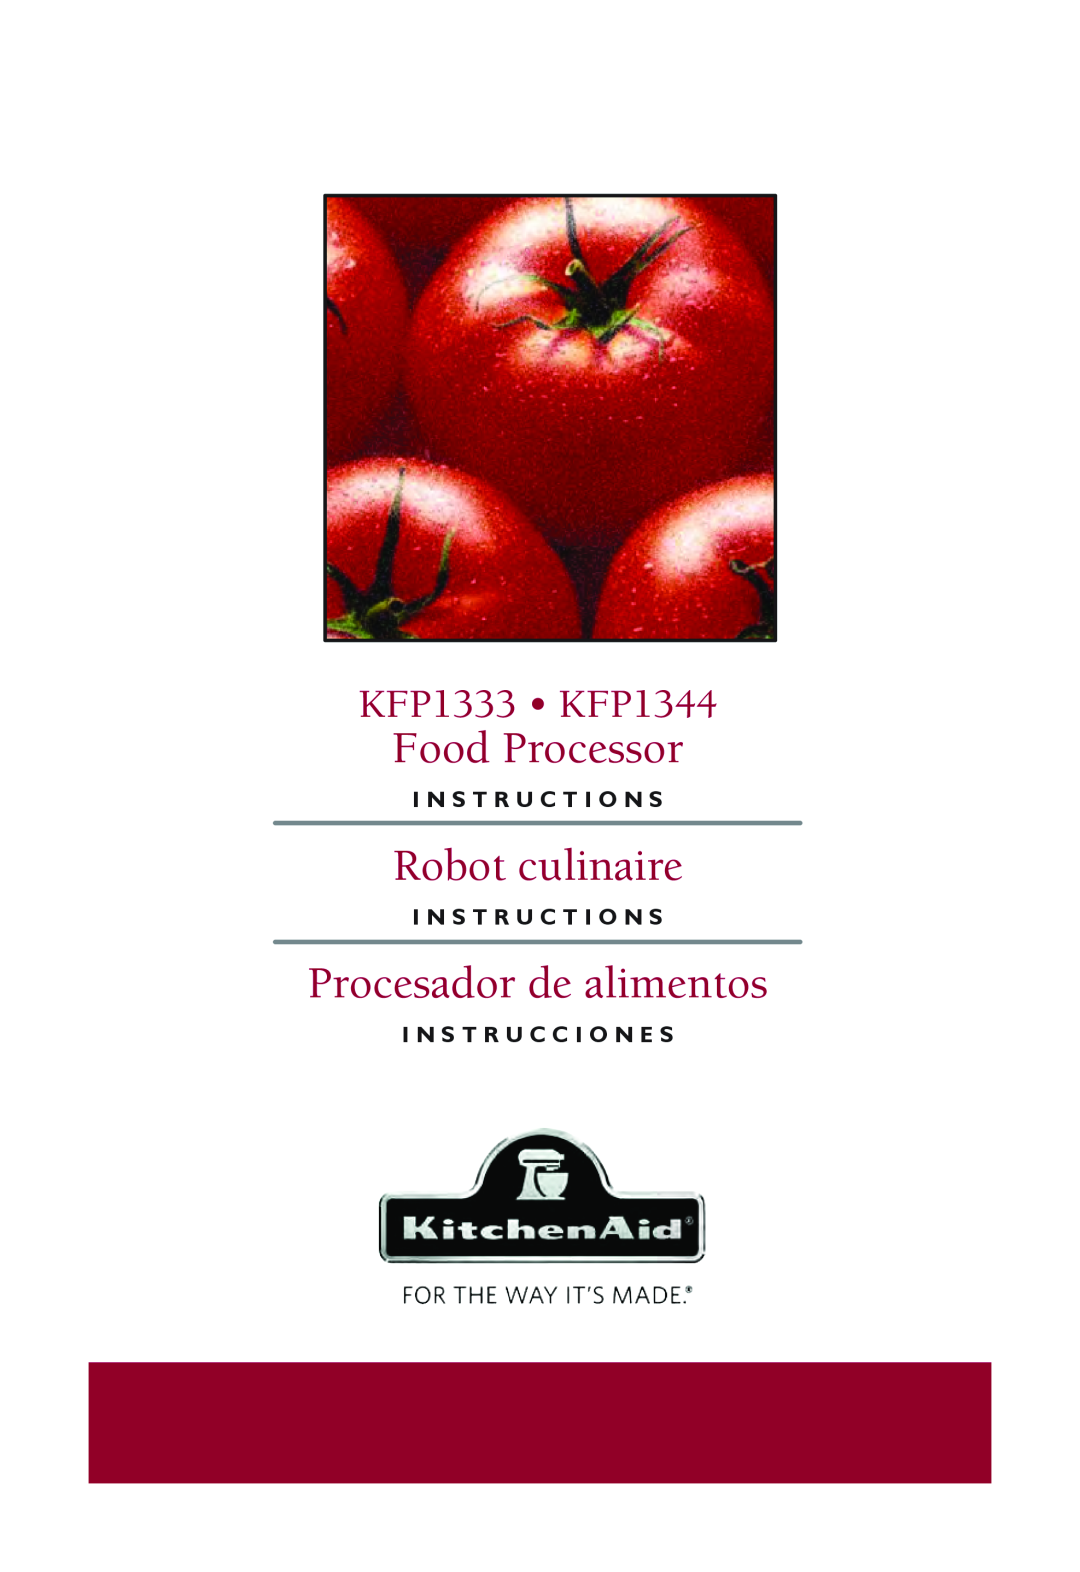 KitchenAid KFP1344, KFP1333 manual I N S T R U C T I O N S, I N S T R U C C I O N E S, Food Processor, Robot culinaire 